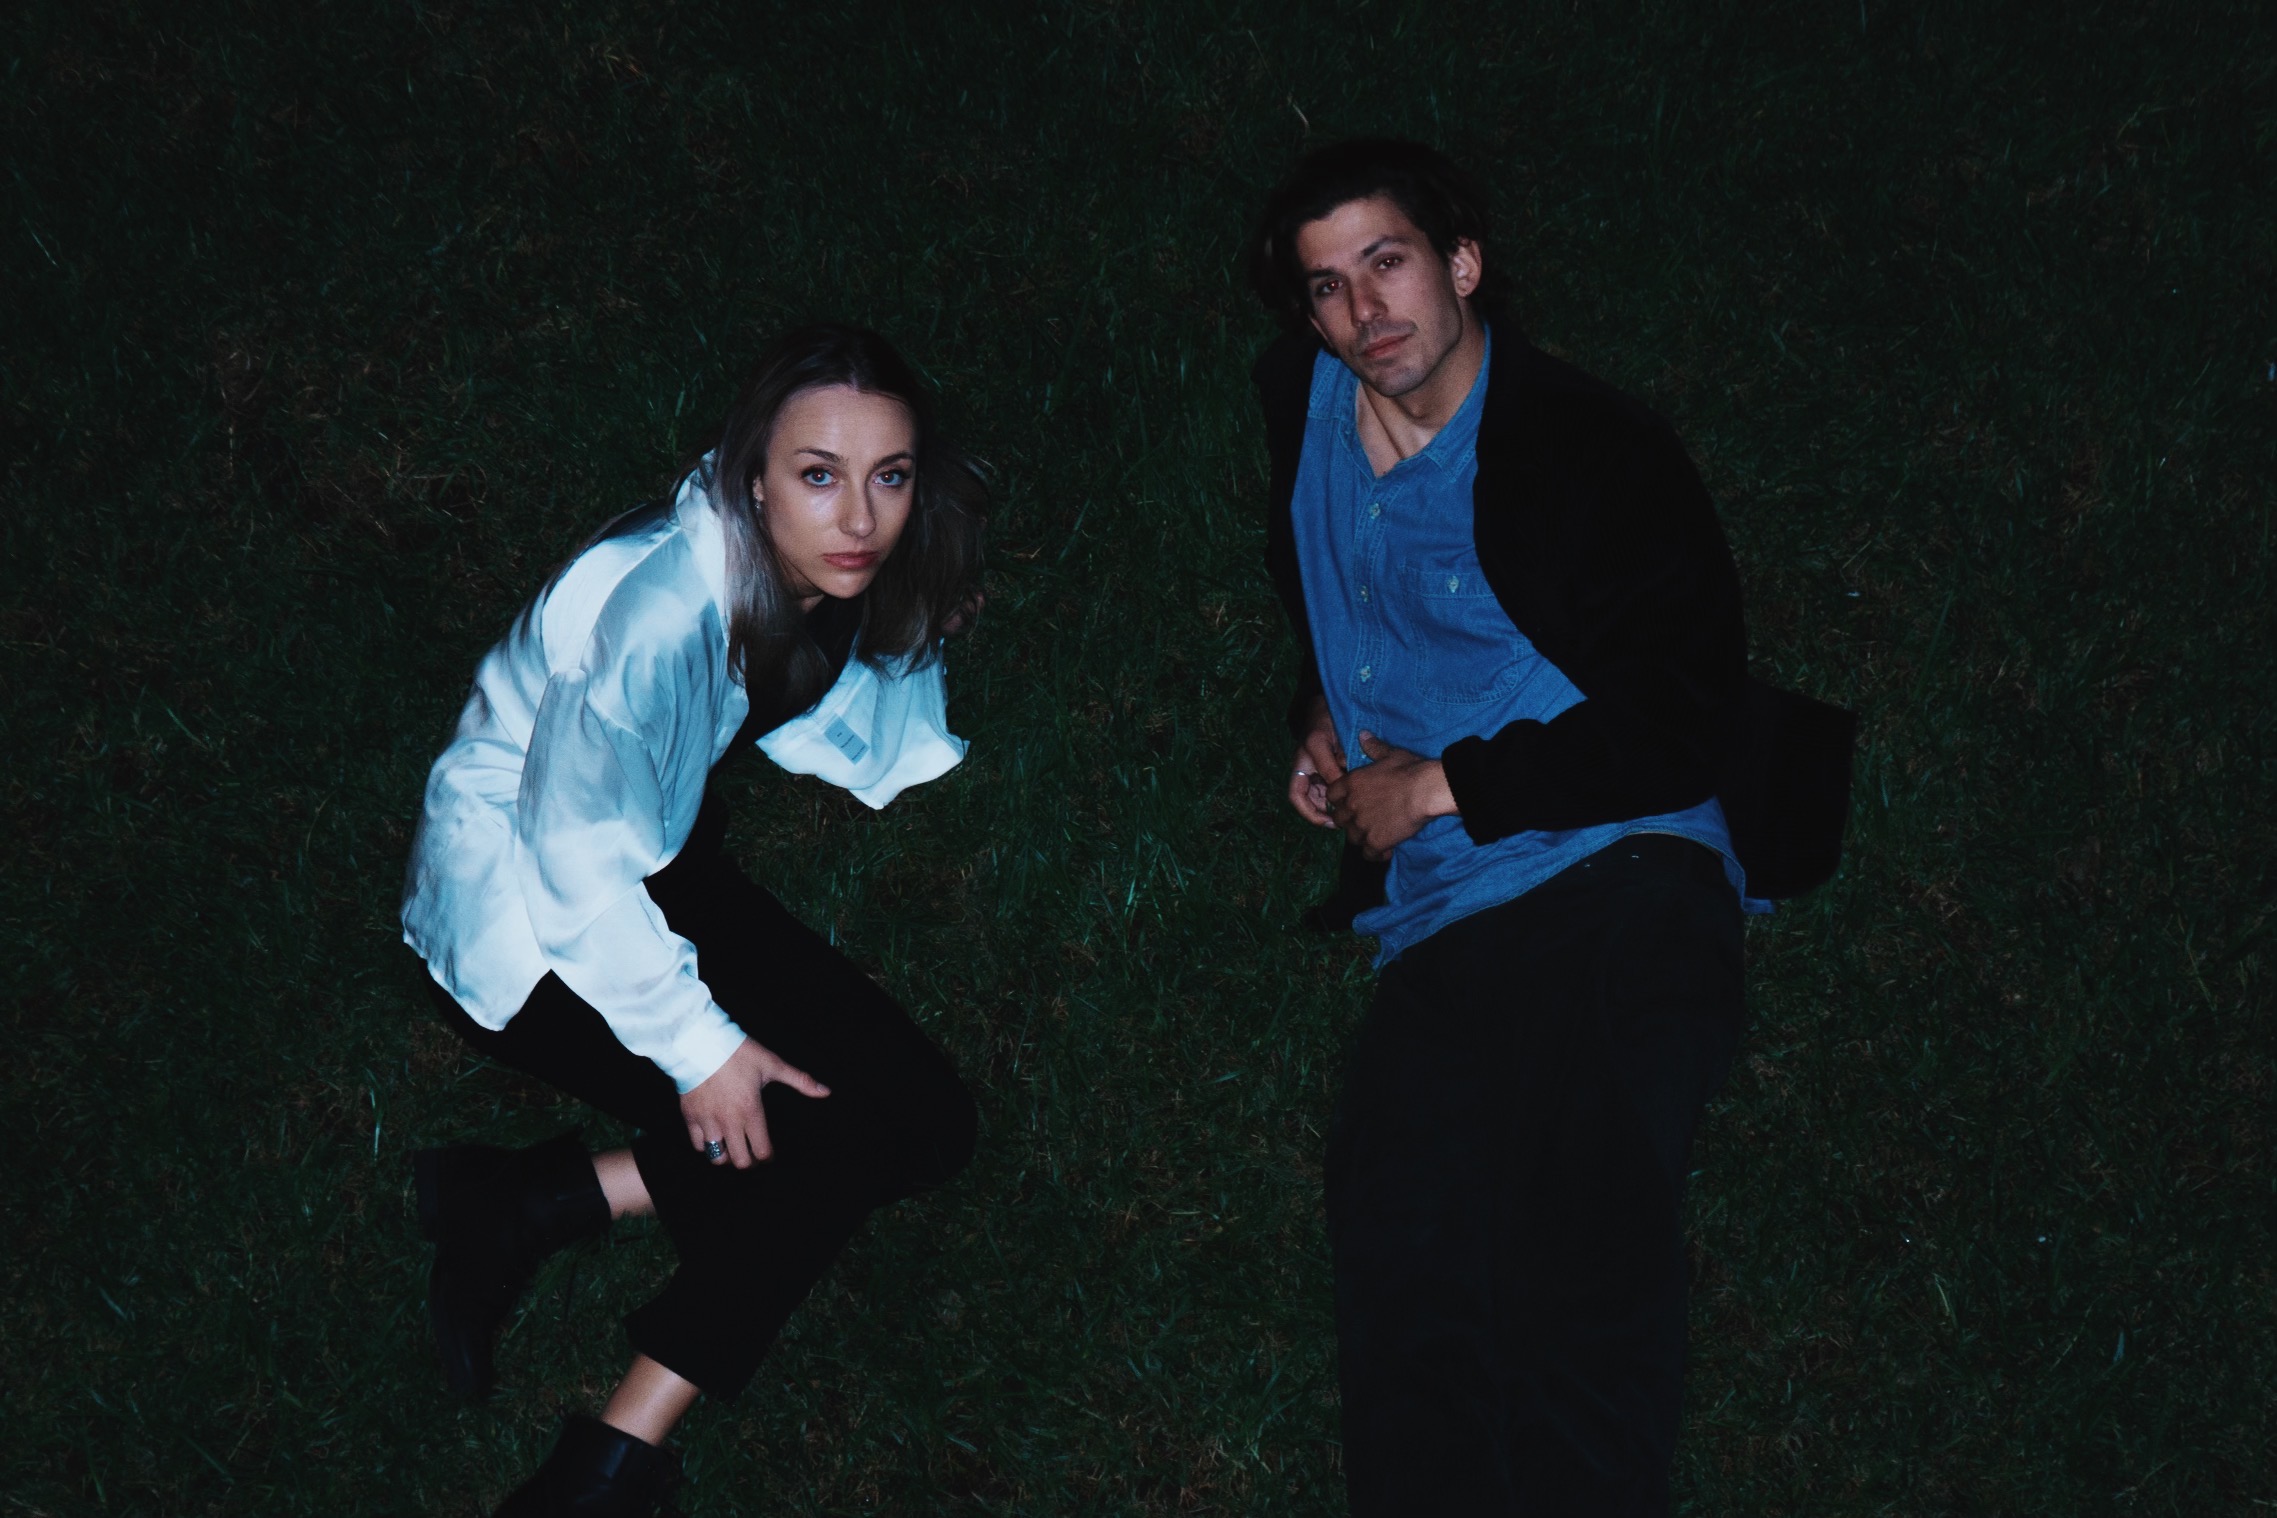 MICRA RELEASE ‘DOESN’T MEAN A THING’ + ANNOUNCE SECOND IN EP TRIOLOGY